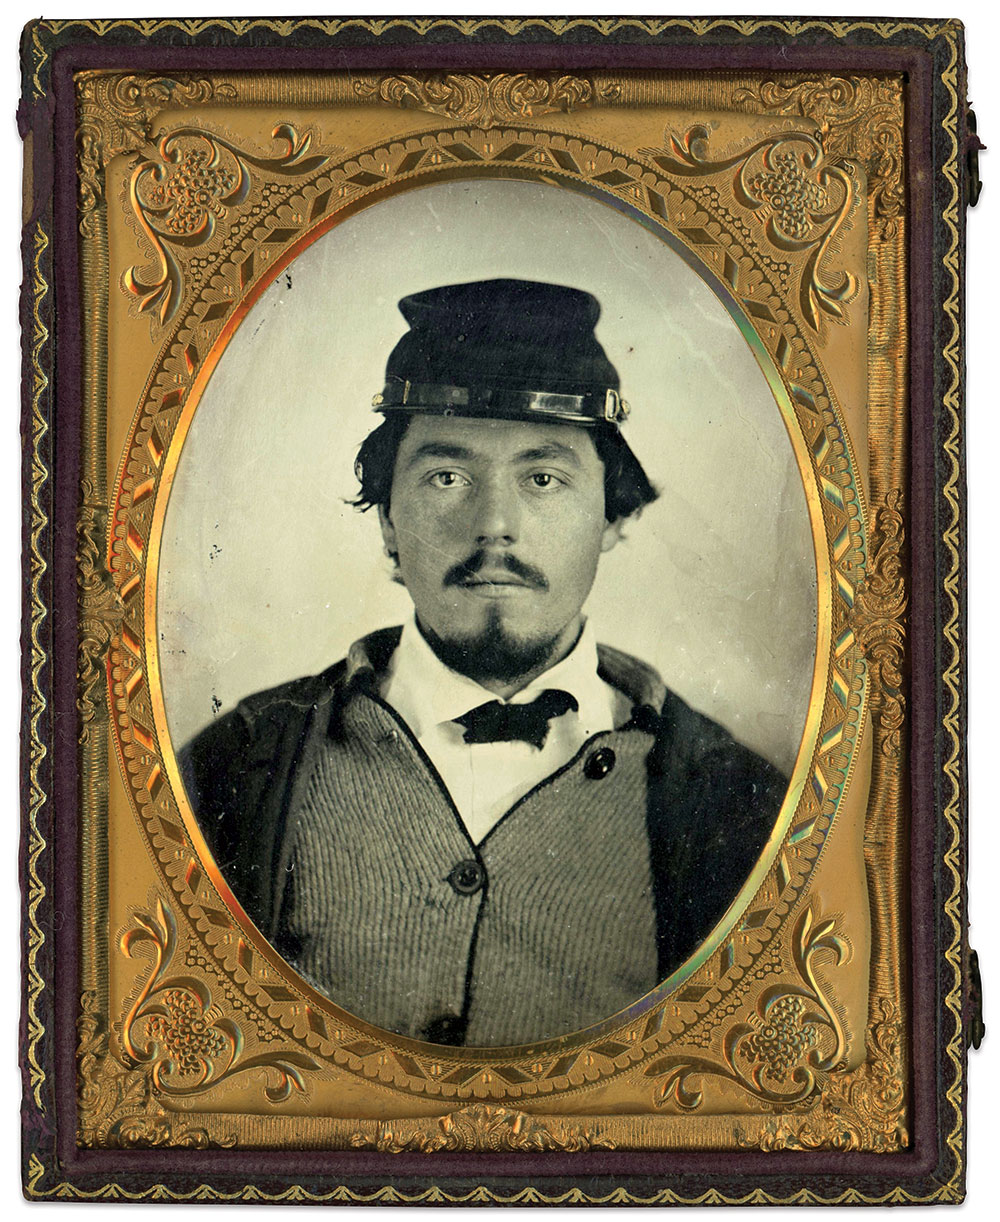 Quarter-plate ambrotype by an anonymous photographer.